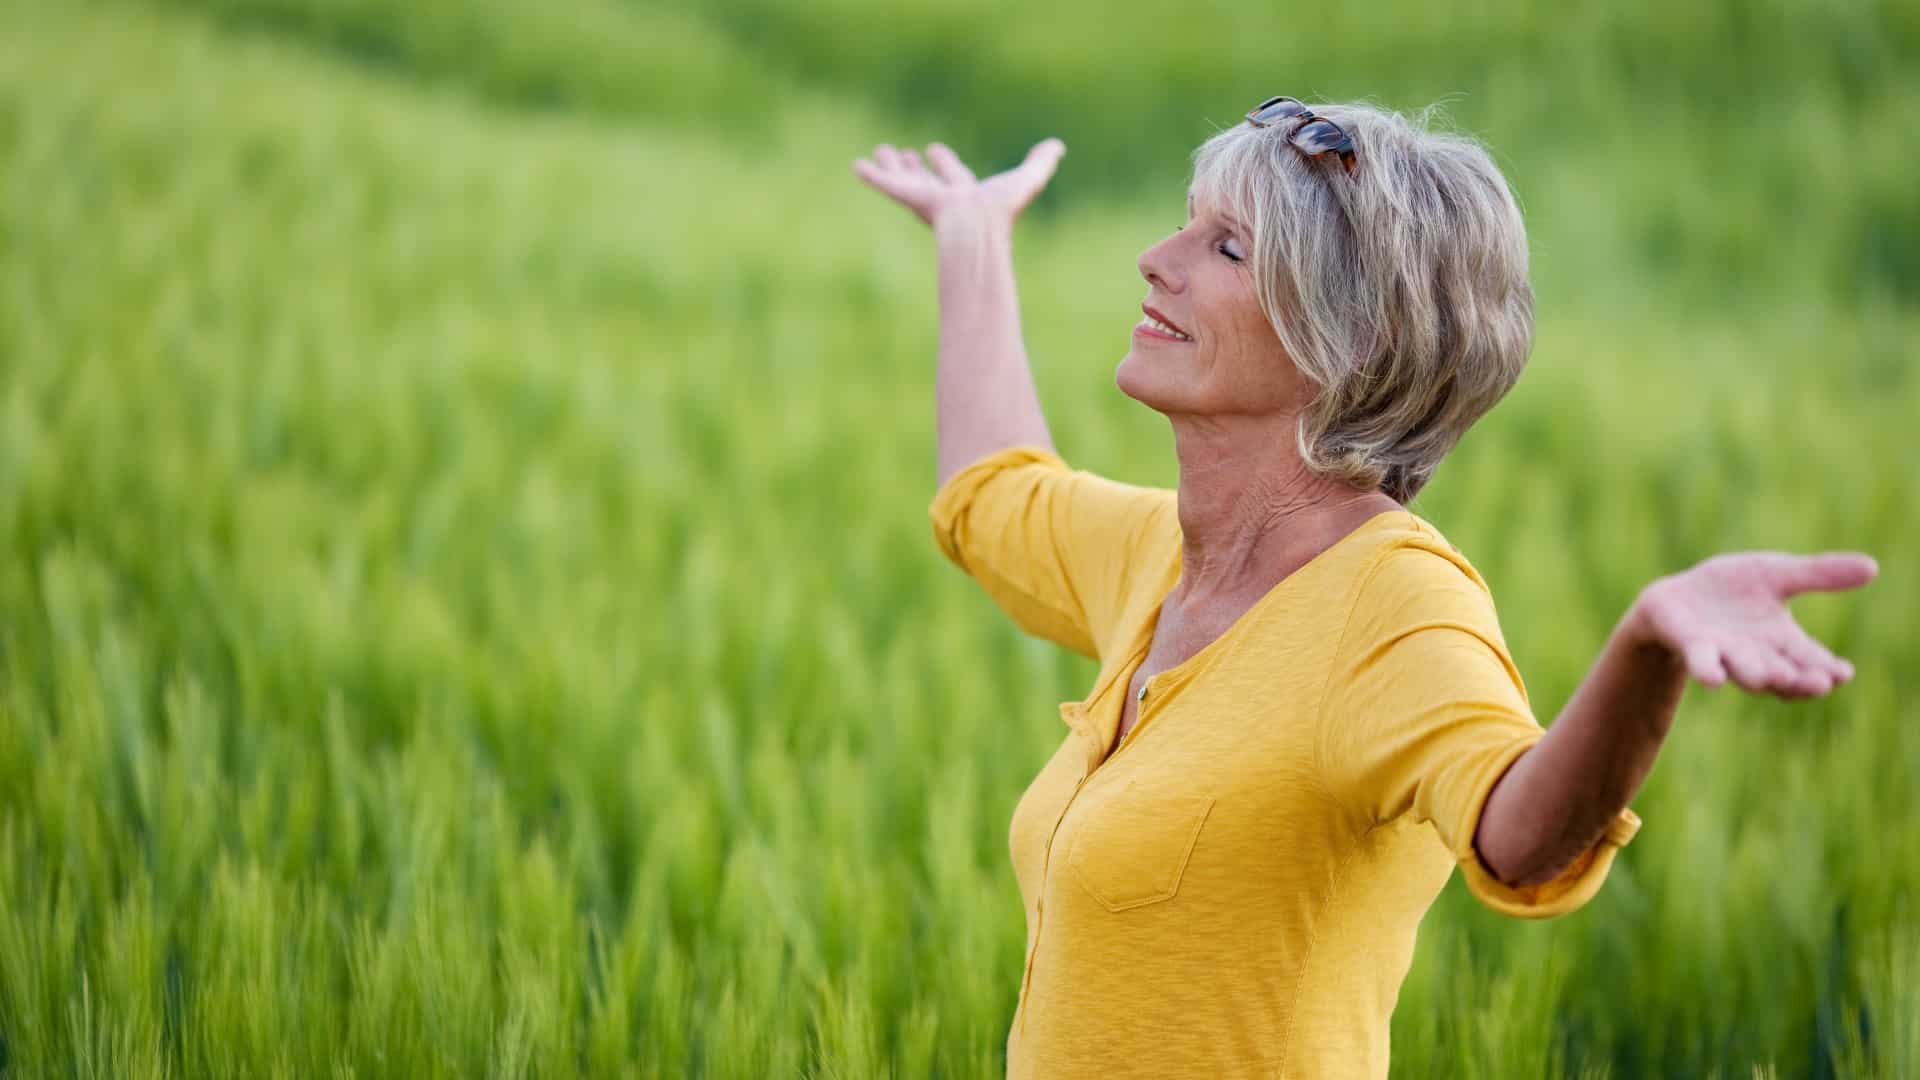 Smiling middle-age woman with outstretched arms standing in a pretty green field, enjoying nature